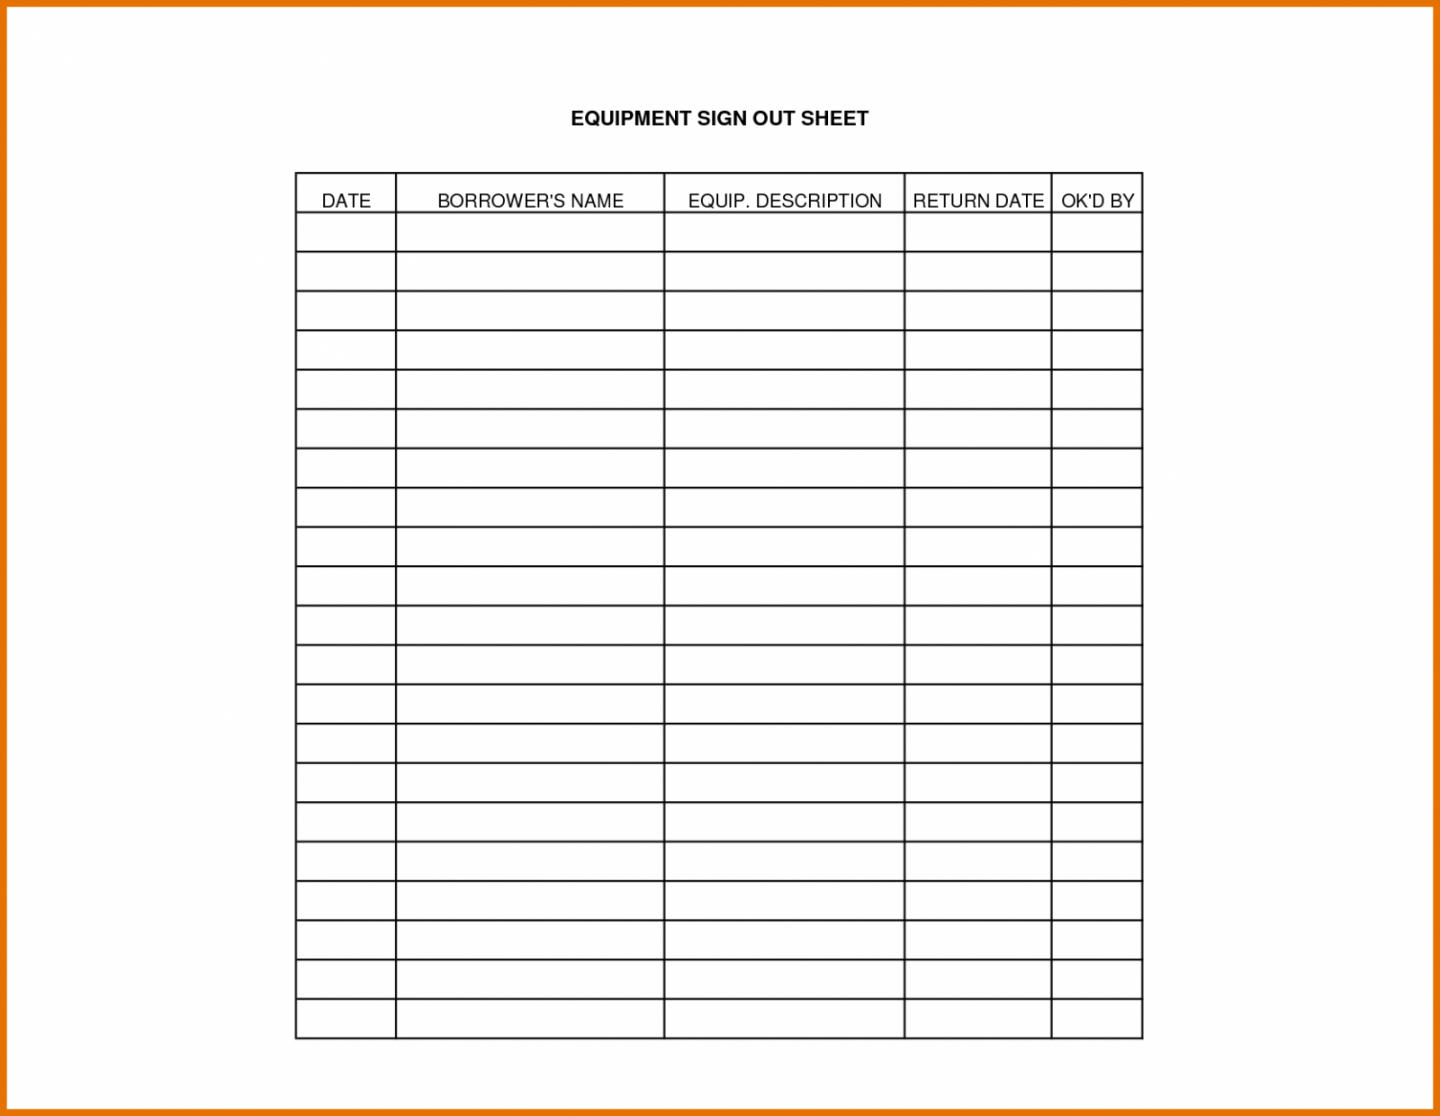 Sign Out Sheet Template For Equipment | Beconchina - Free Printable Sign In And Out Sheets